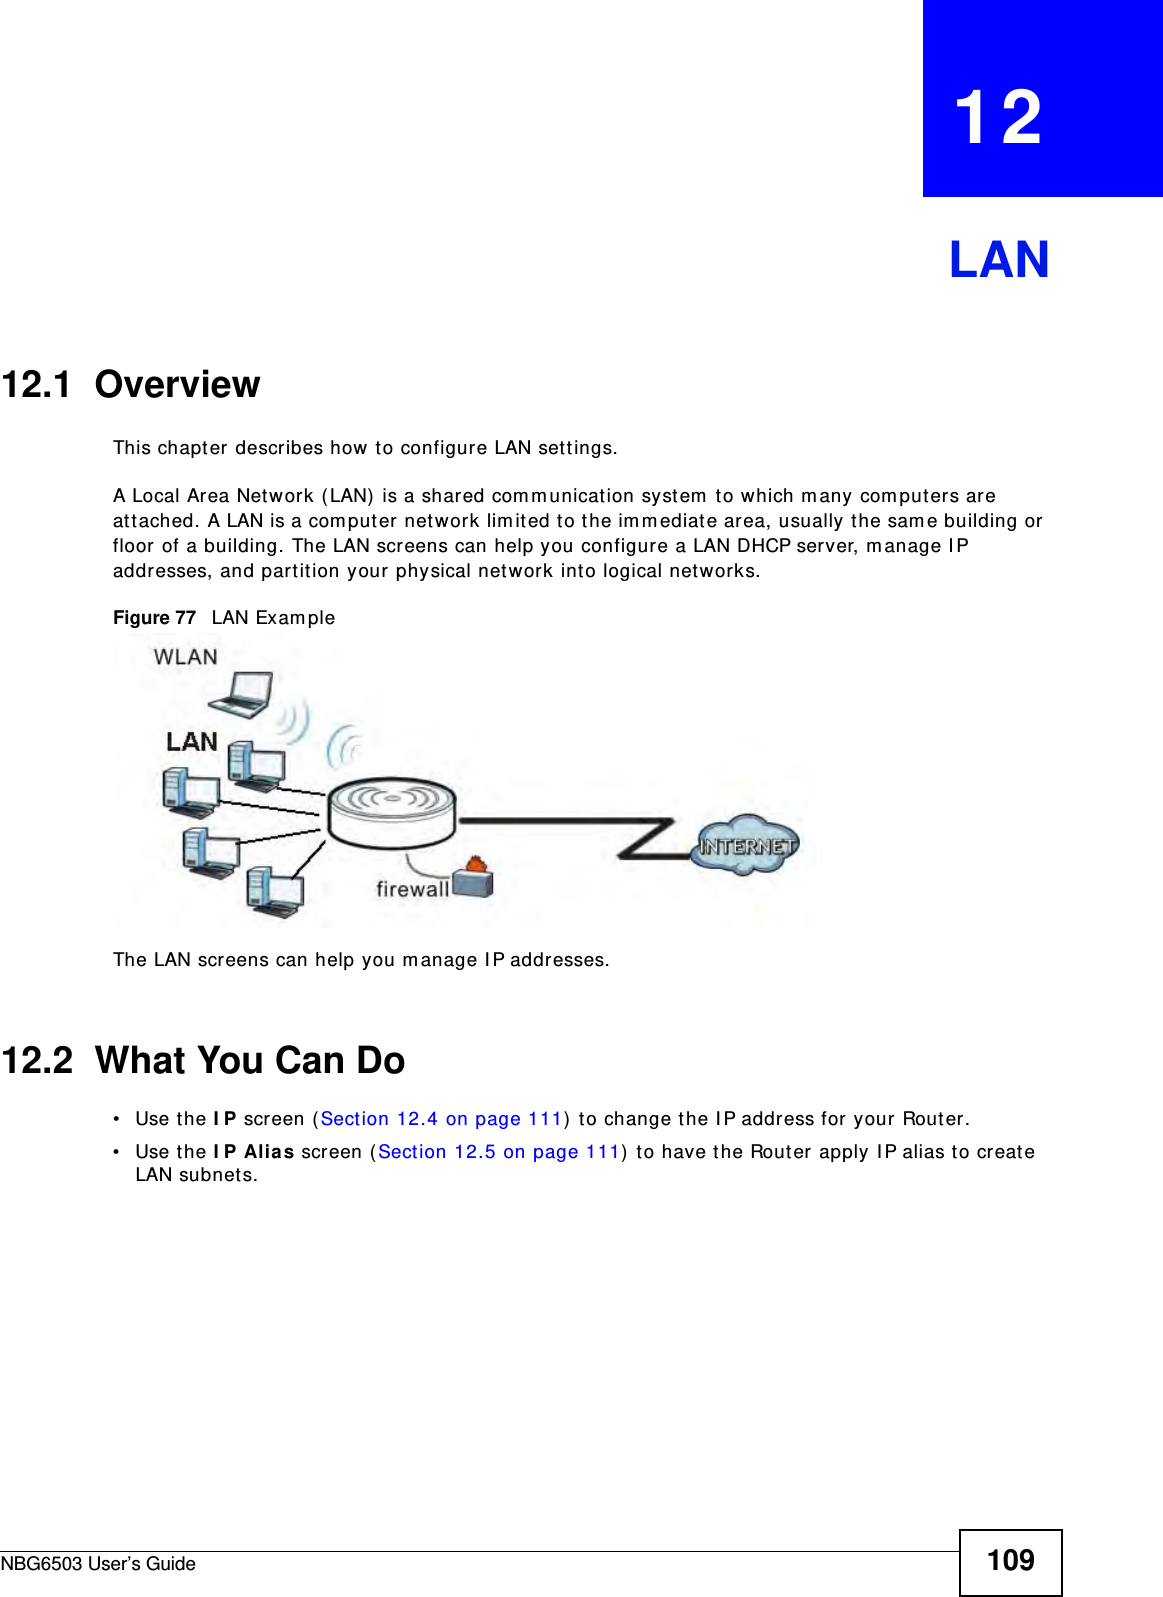 NBG6503 User’s Guide 109CHAPTER   12LAN12.1  OverviewThis chapter describes how to configure LAN settings.A Local Area Network (LAN) is a shared communication system to which many computers are attached. A LAN is a computer network limited to the immediate area, usually the same building or floor of a building. The LAN screens can help you configure a LAN DHCP server, manage IP addresses, and partition your physical network into logical networks.Figure 77   LAN ExampleThe LAN screens can help you manage IP addresses.12.2  What You Can Do•Use the IP screen (Section 12.4 on page 111) to change the IP address for your Router.•Use the IP Alias screen (Section 12.5 on page 111) to have the Router apply IP alias to create LAN subnets.